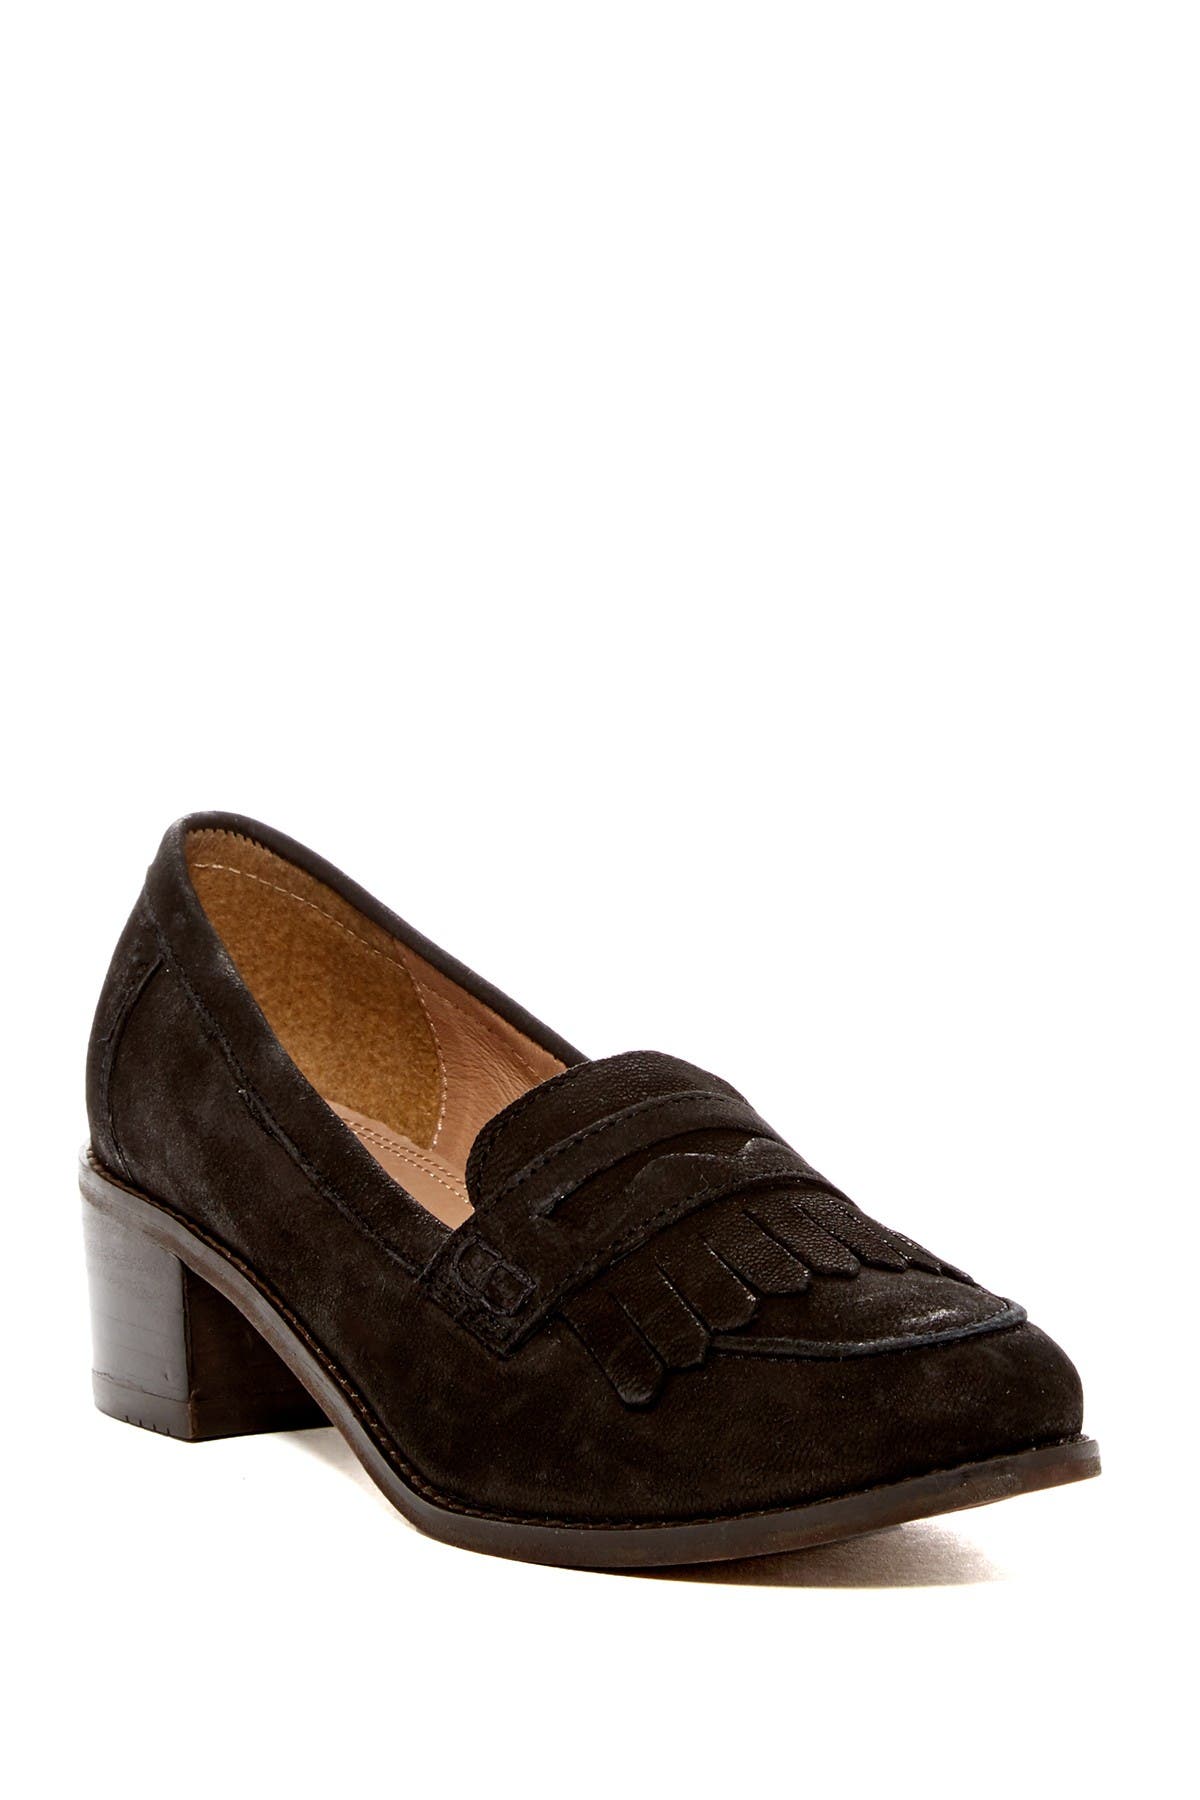 dune shoes loafers